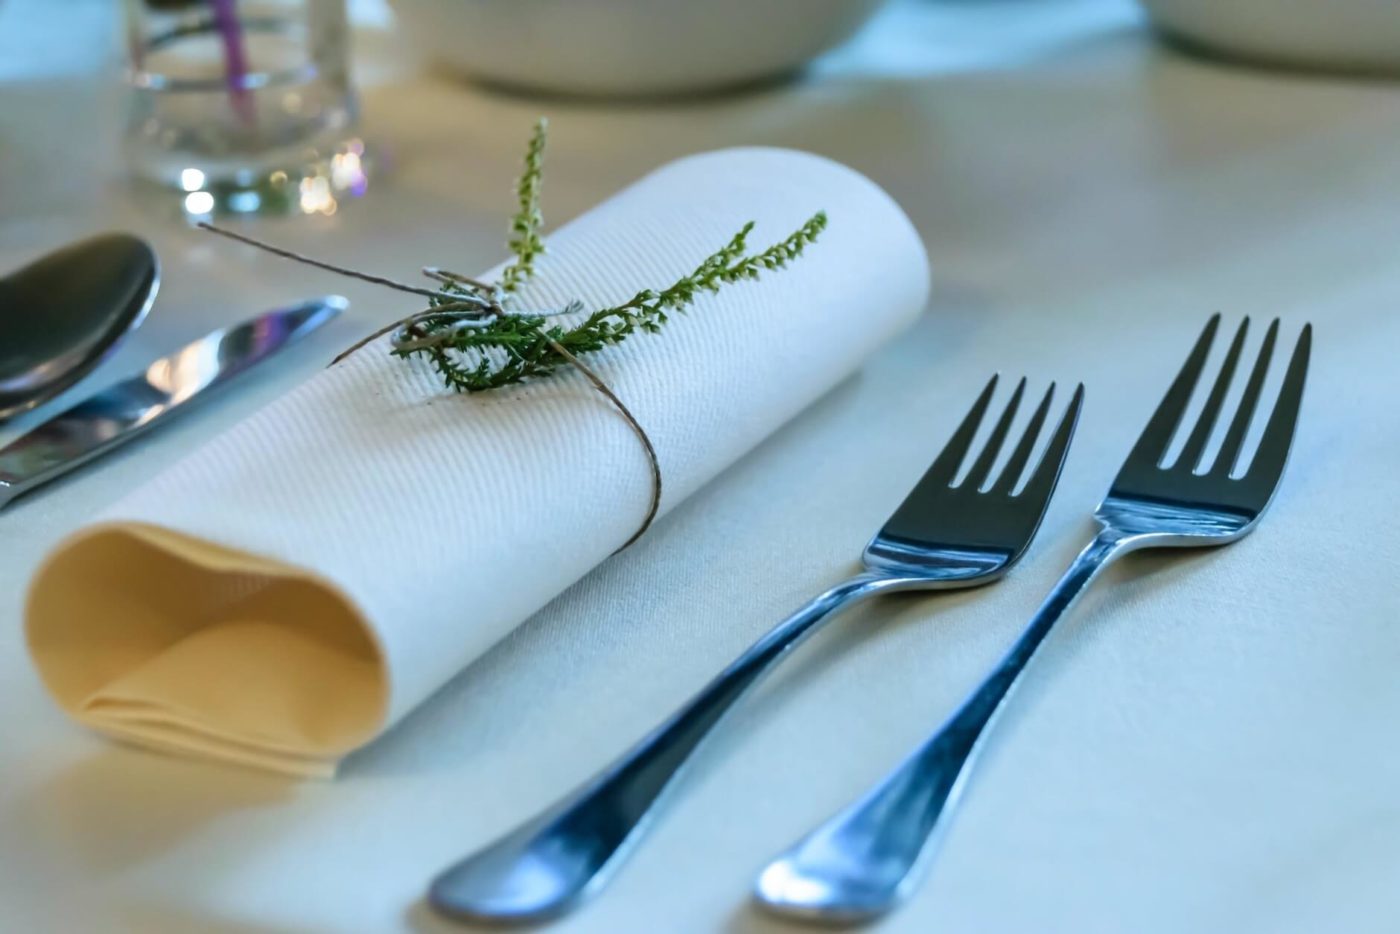 Cutlery on the decorated table